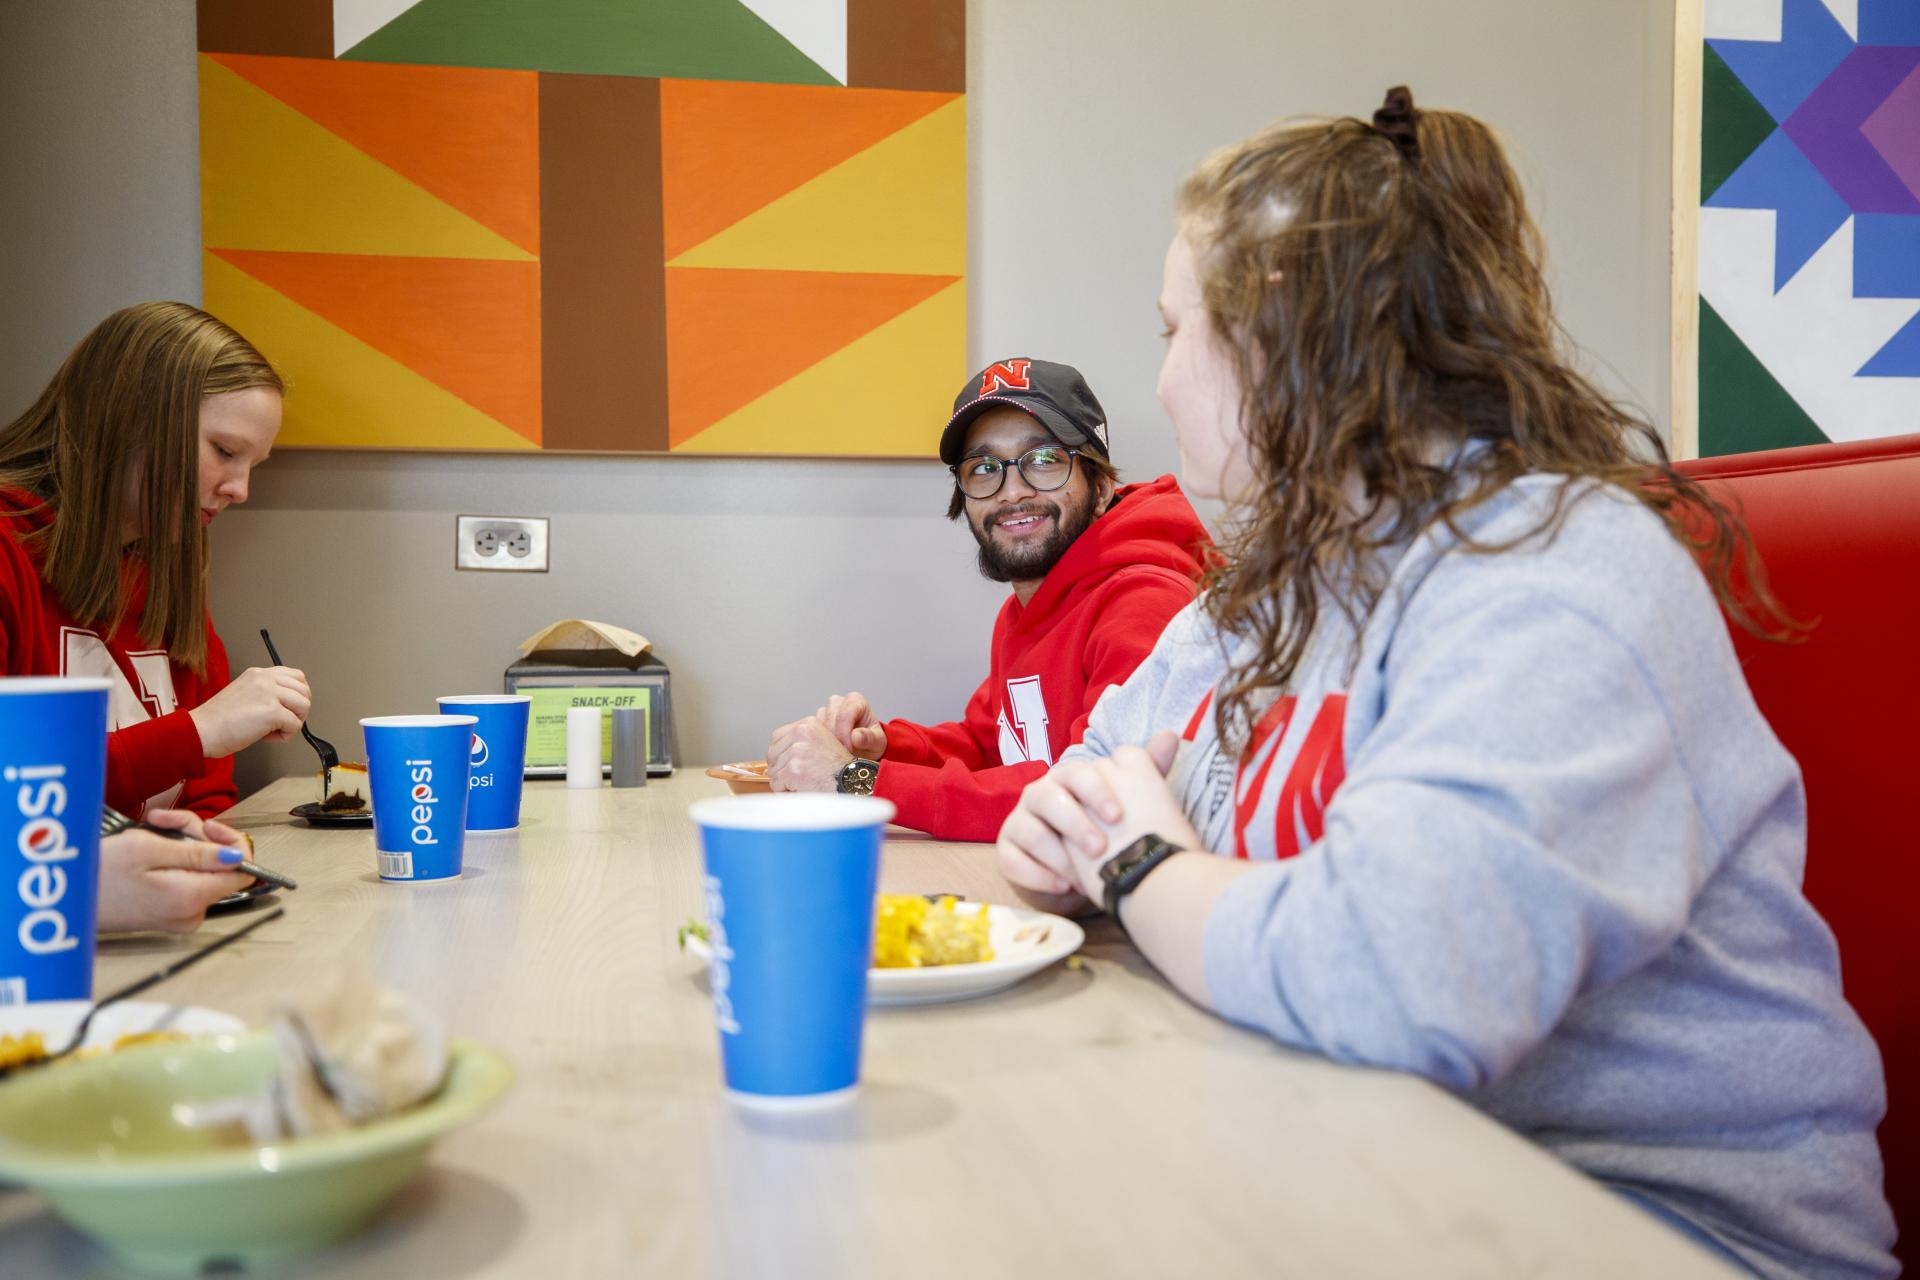 Students dine in a booth at the East Campus Dining Center